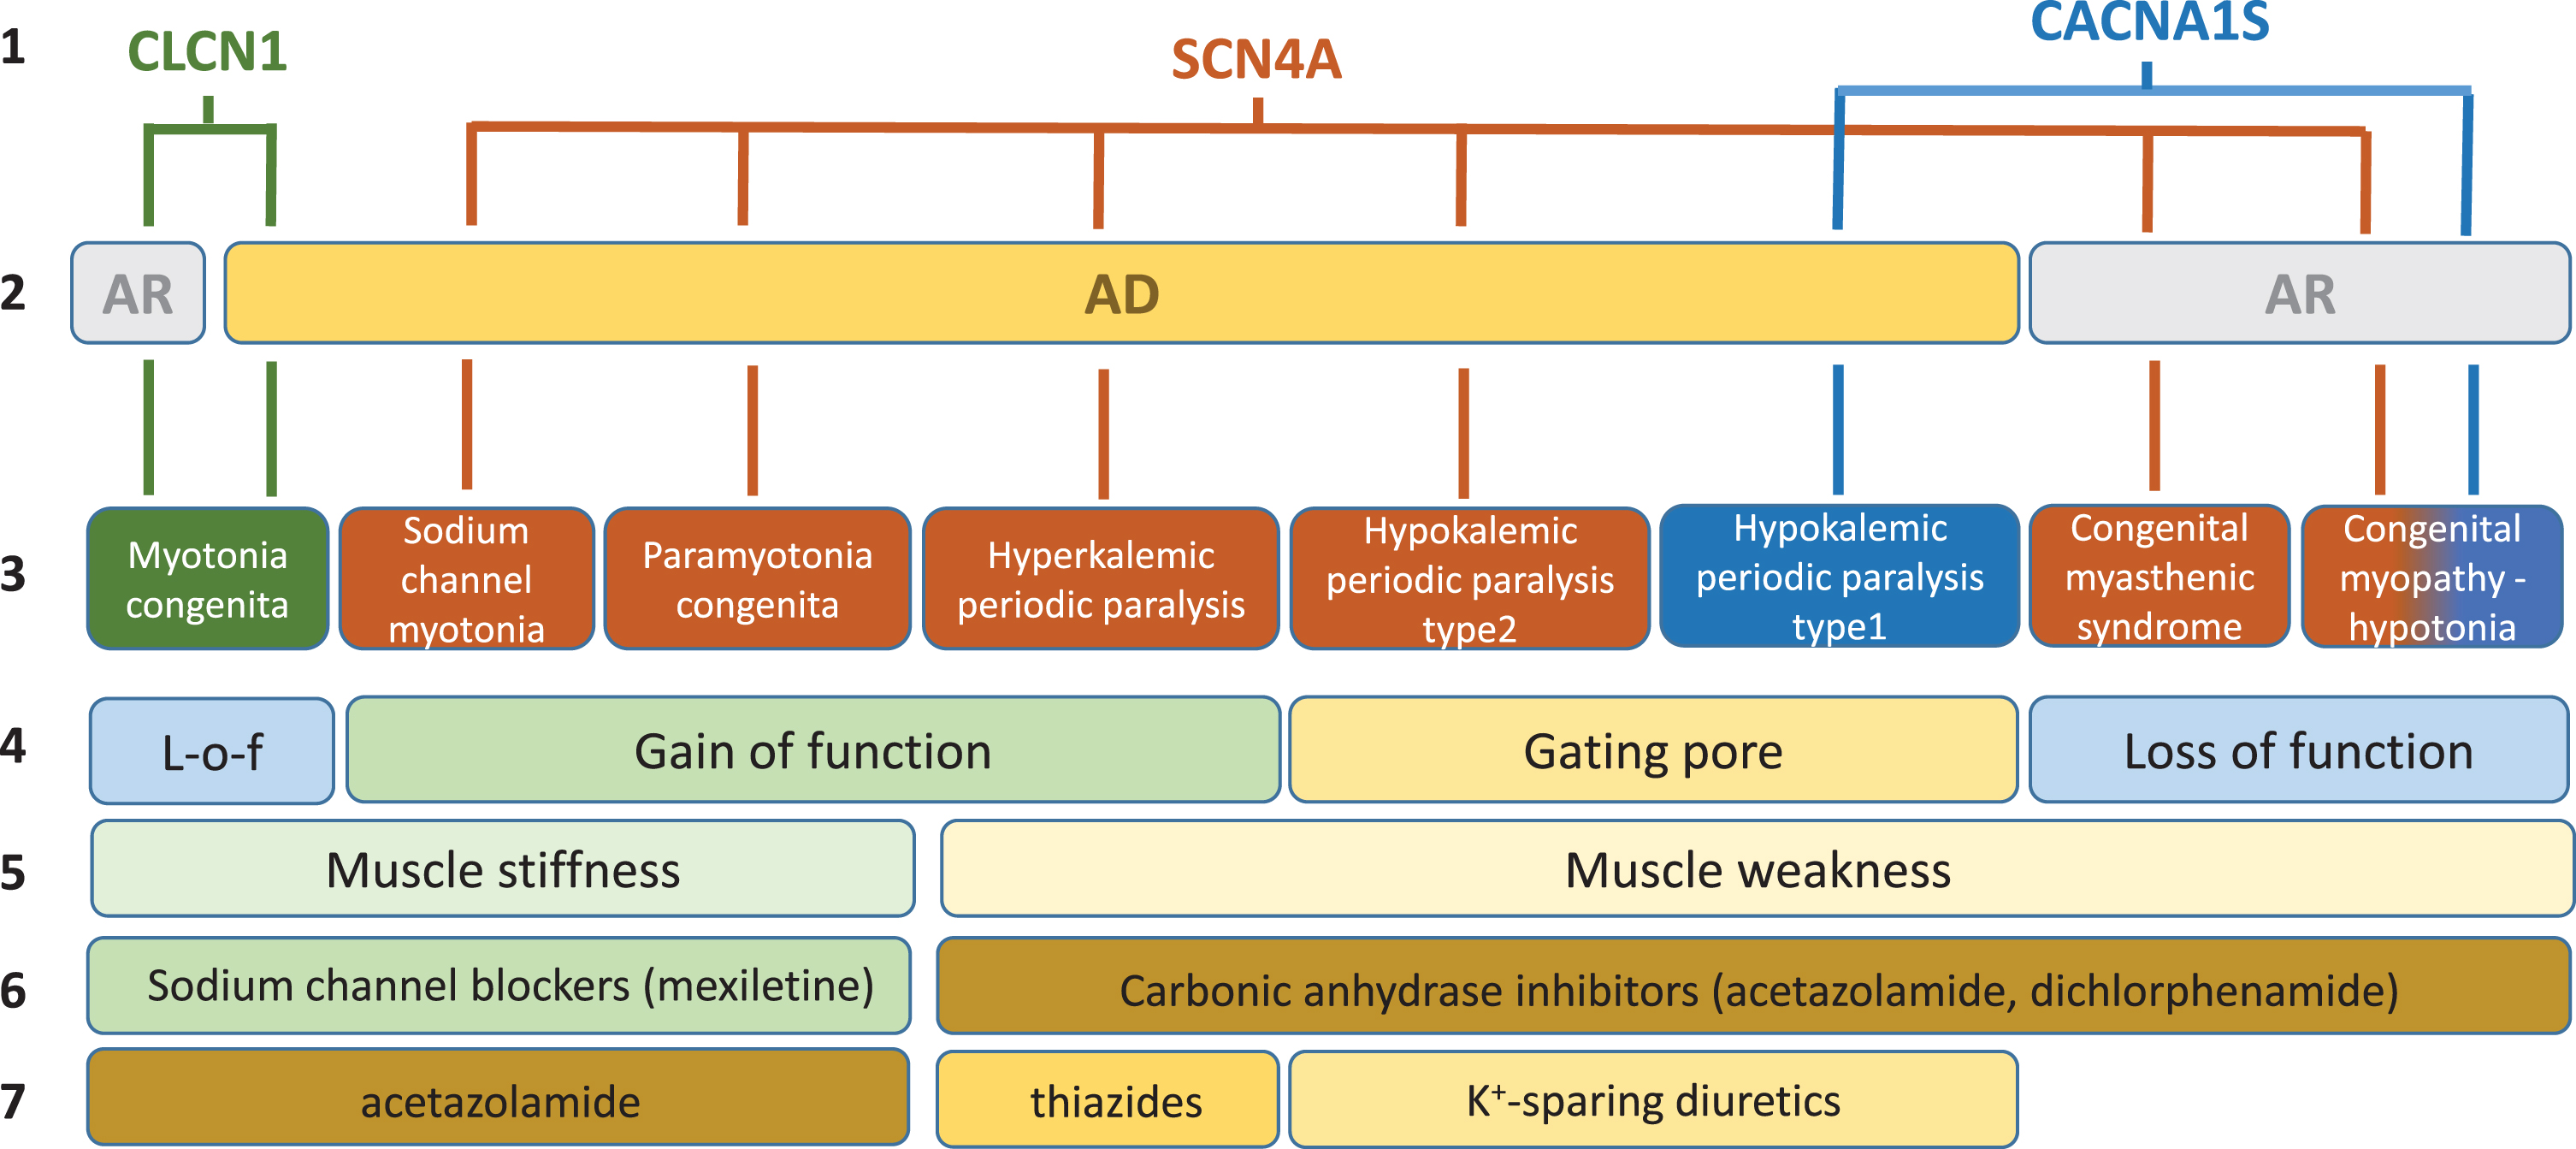 Schematic description of current knowledge regarding skeletal muscle ion channelopathies considered in this systematic review. First line: mutated gene. Second line: mode of inheritance (AR, autosomal recessive; AD: autosomal dominant). Third line: disease names. Fourth line: main effect of mutations on channel function. Fifth line: main symptom. Sixth line: currently preferred symptomatic drugs. Seventh line: second choice drugs.